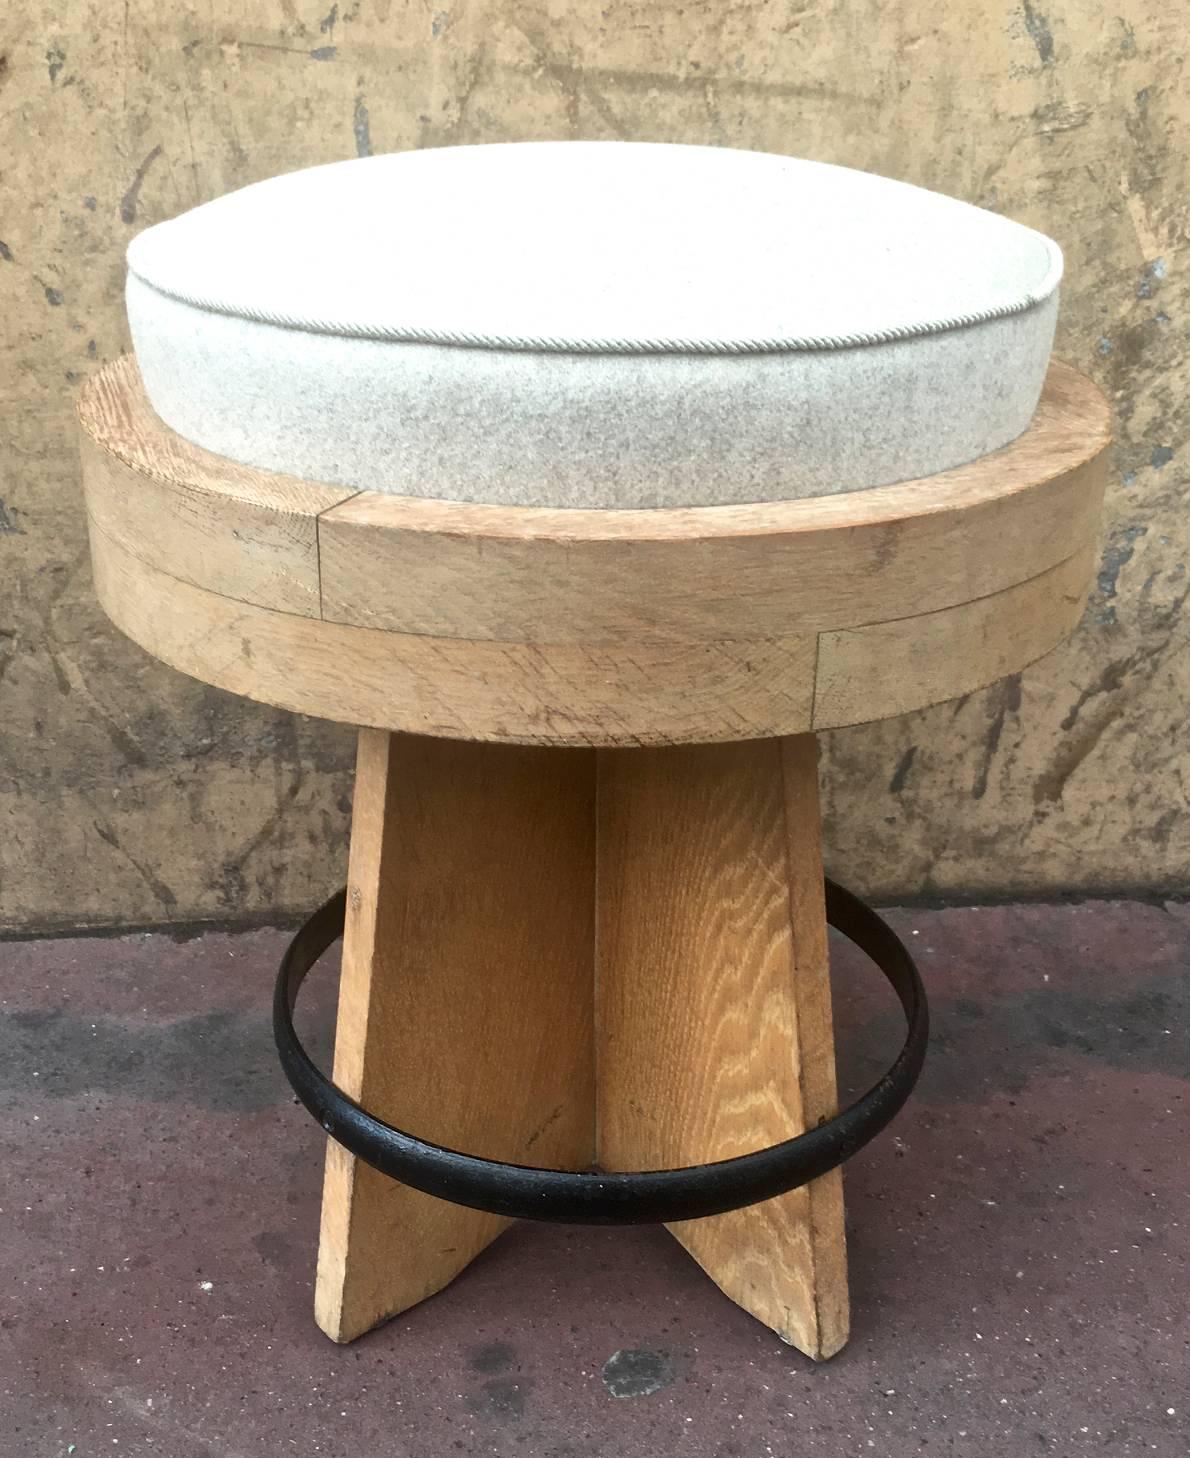 Awesome modernist round stool in oak, newly covered with an iron circle.